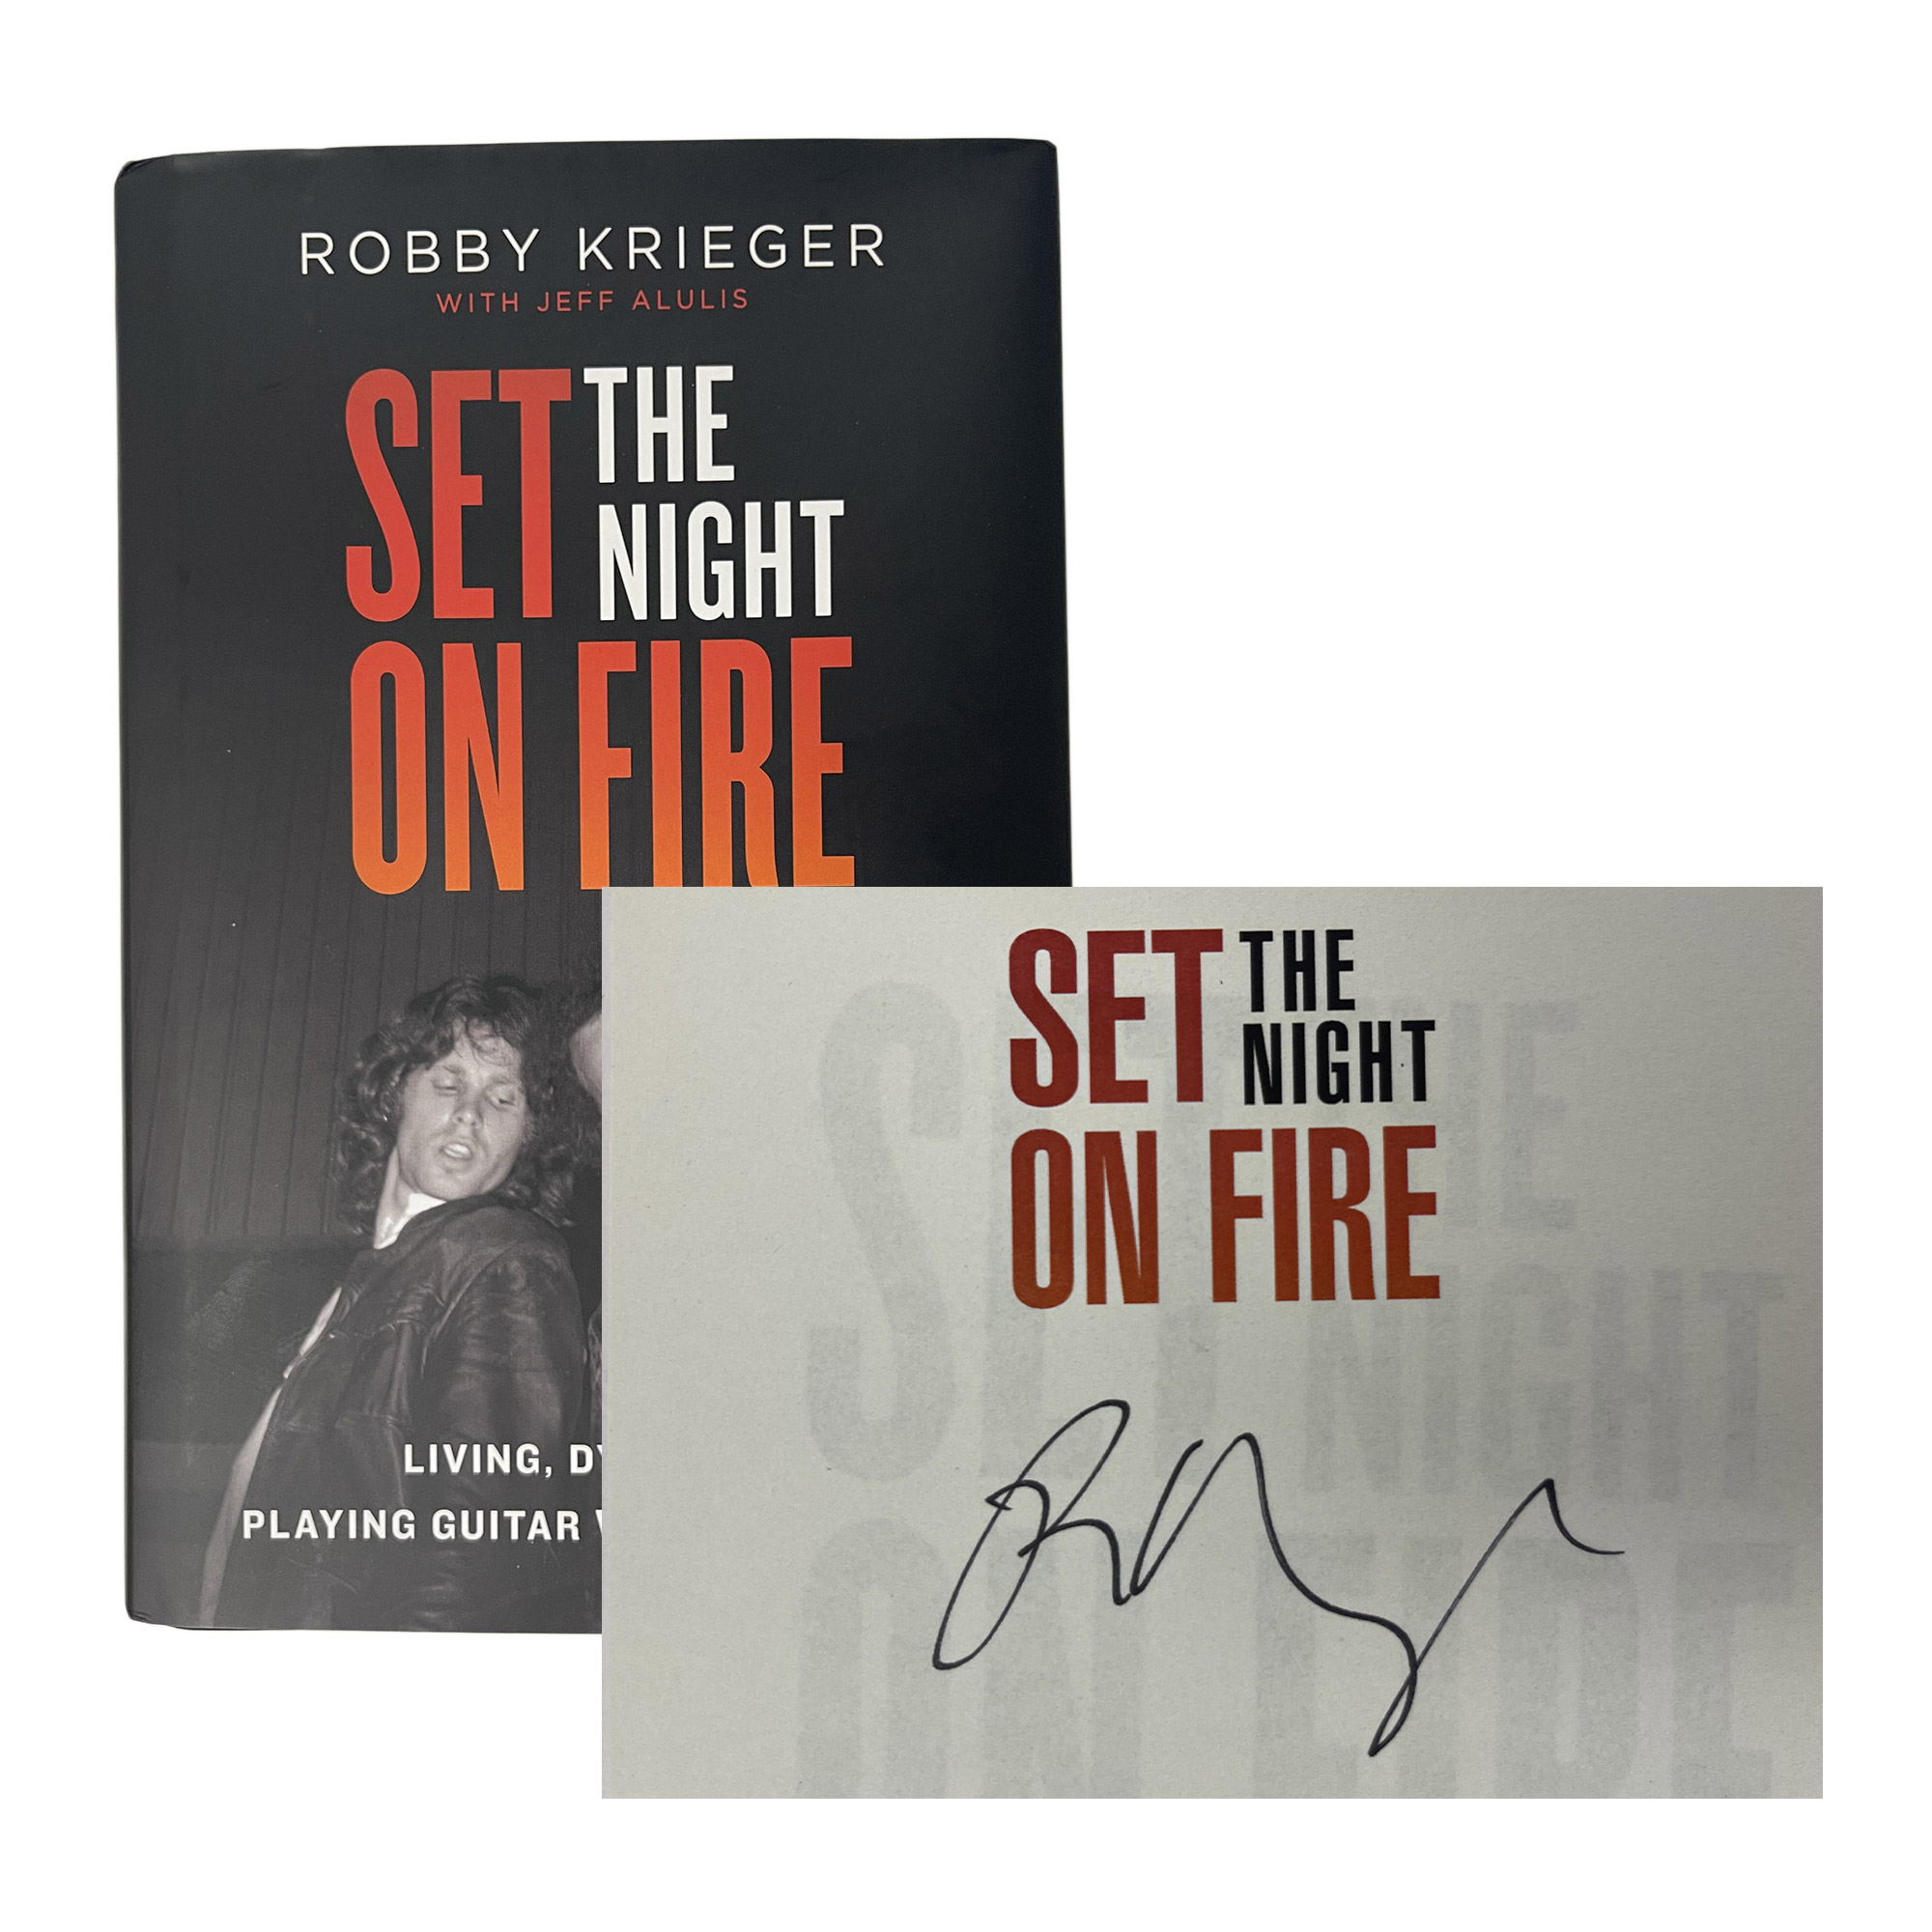 Robby Krieger – Hand Signed Set The Night On Fire Hardcover Book